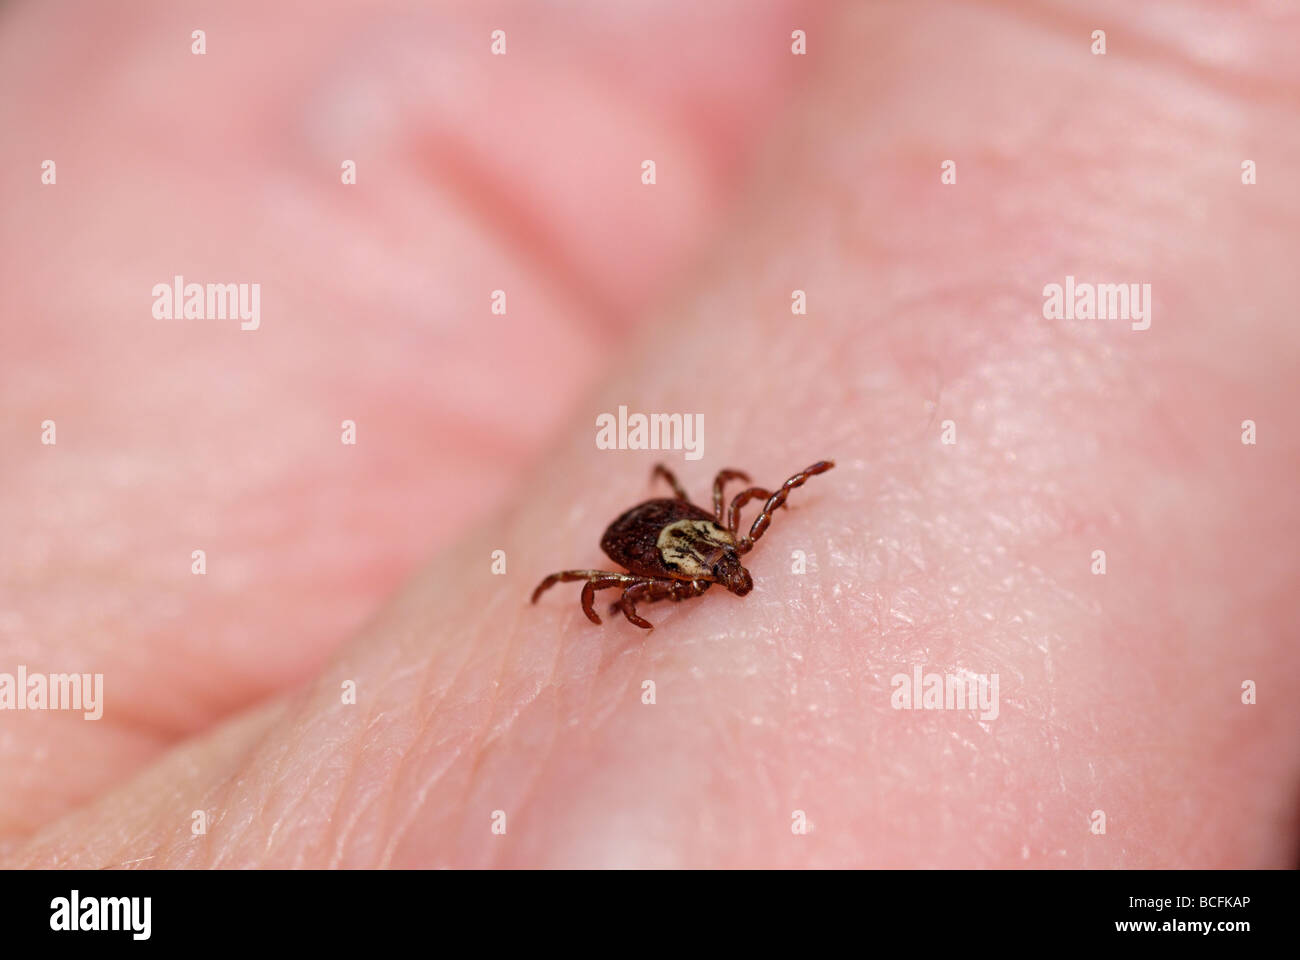 Female American dog tick, Dermacentor variabilis, also known as the wood tick It is on a person's hand. Stock Photo